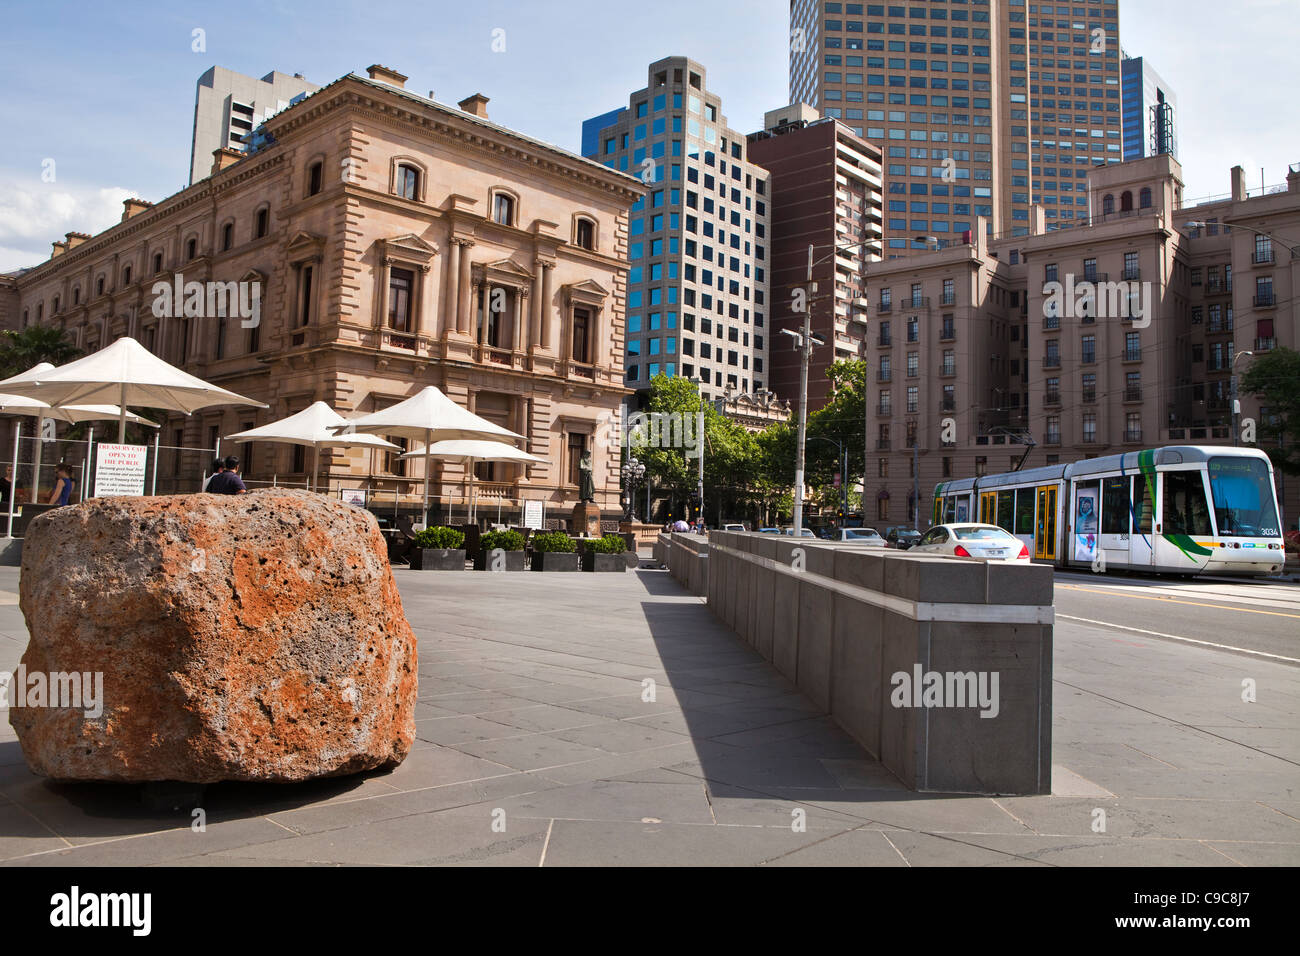 The old Treasury Building on spring street Collins st in Melbourne Australia. on the edge of city CBD Stock Photo